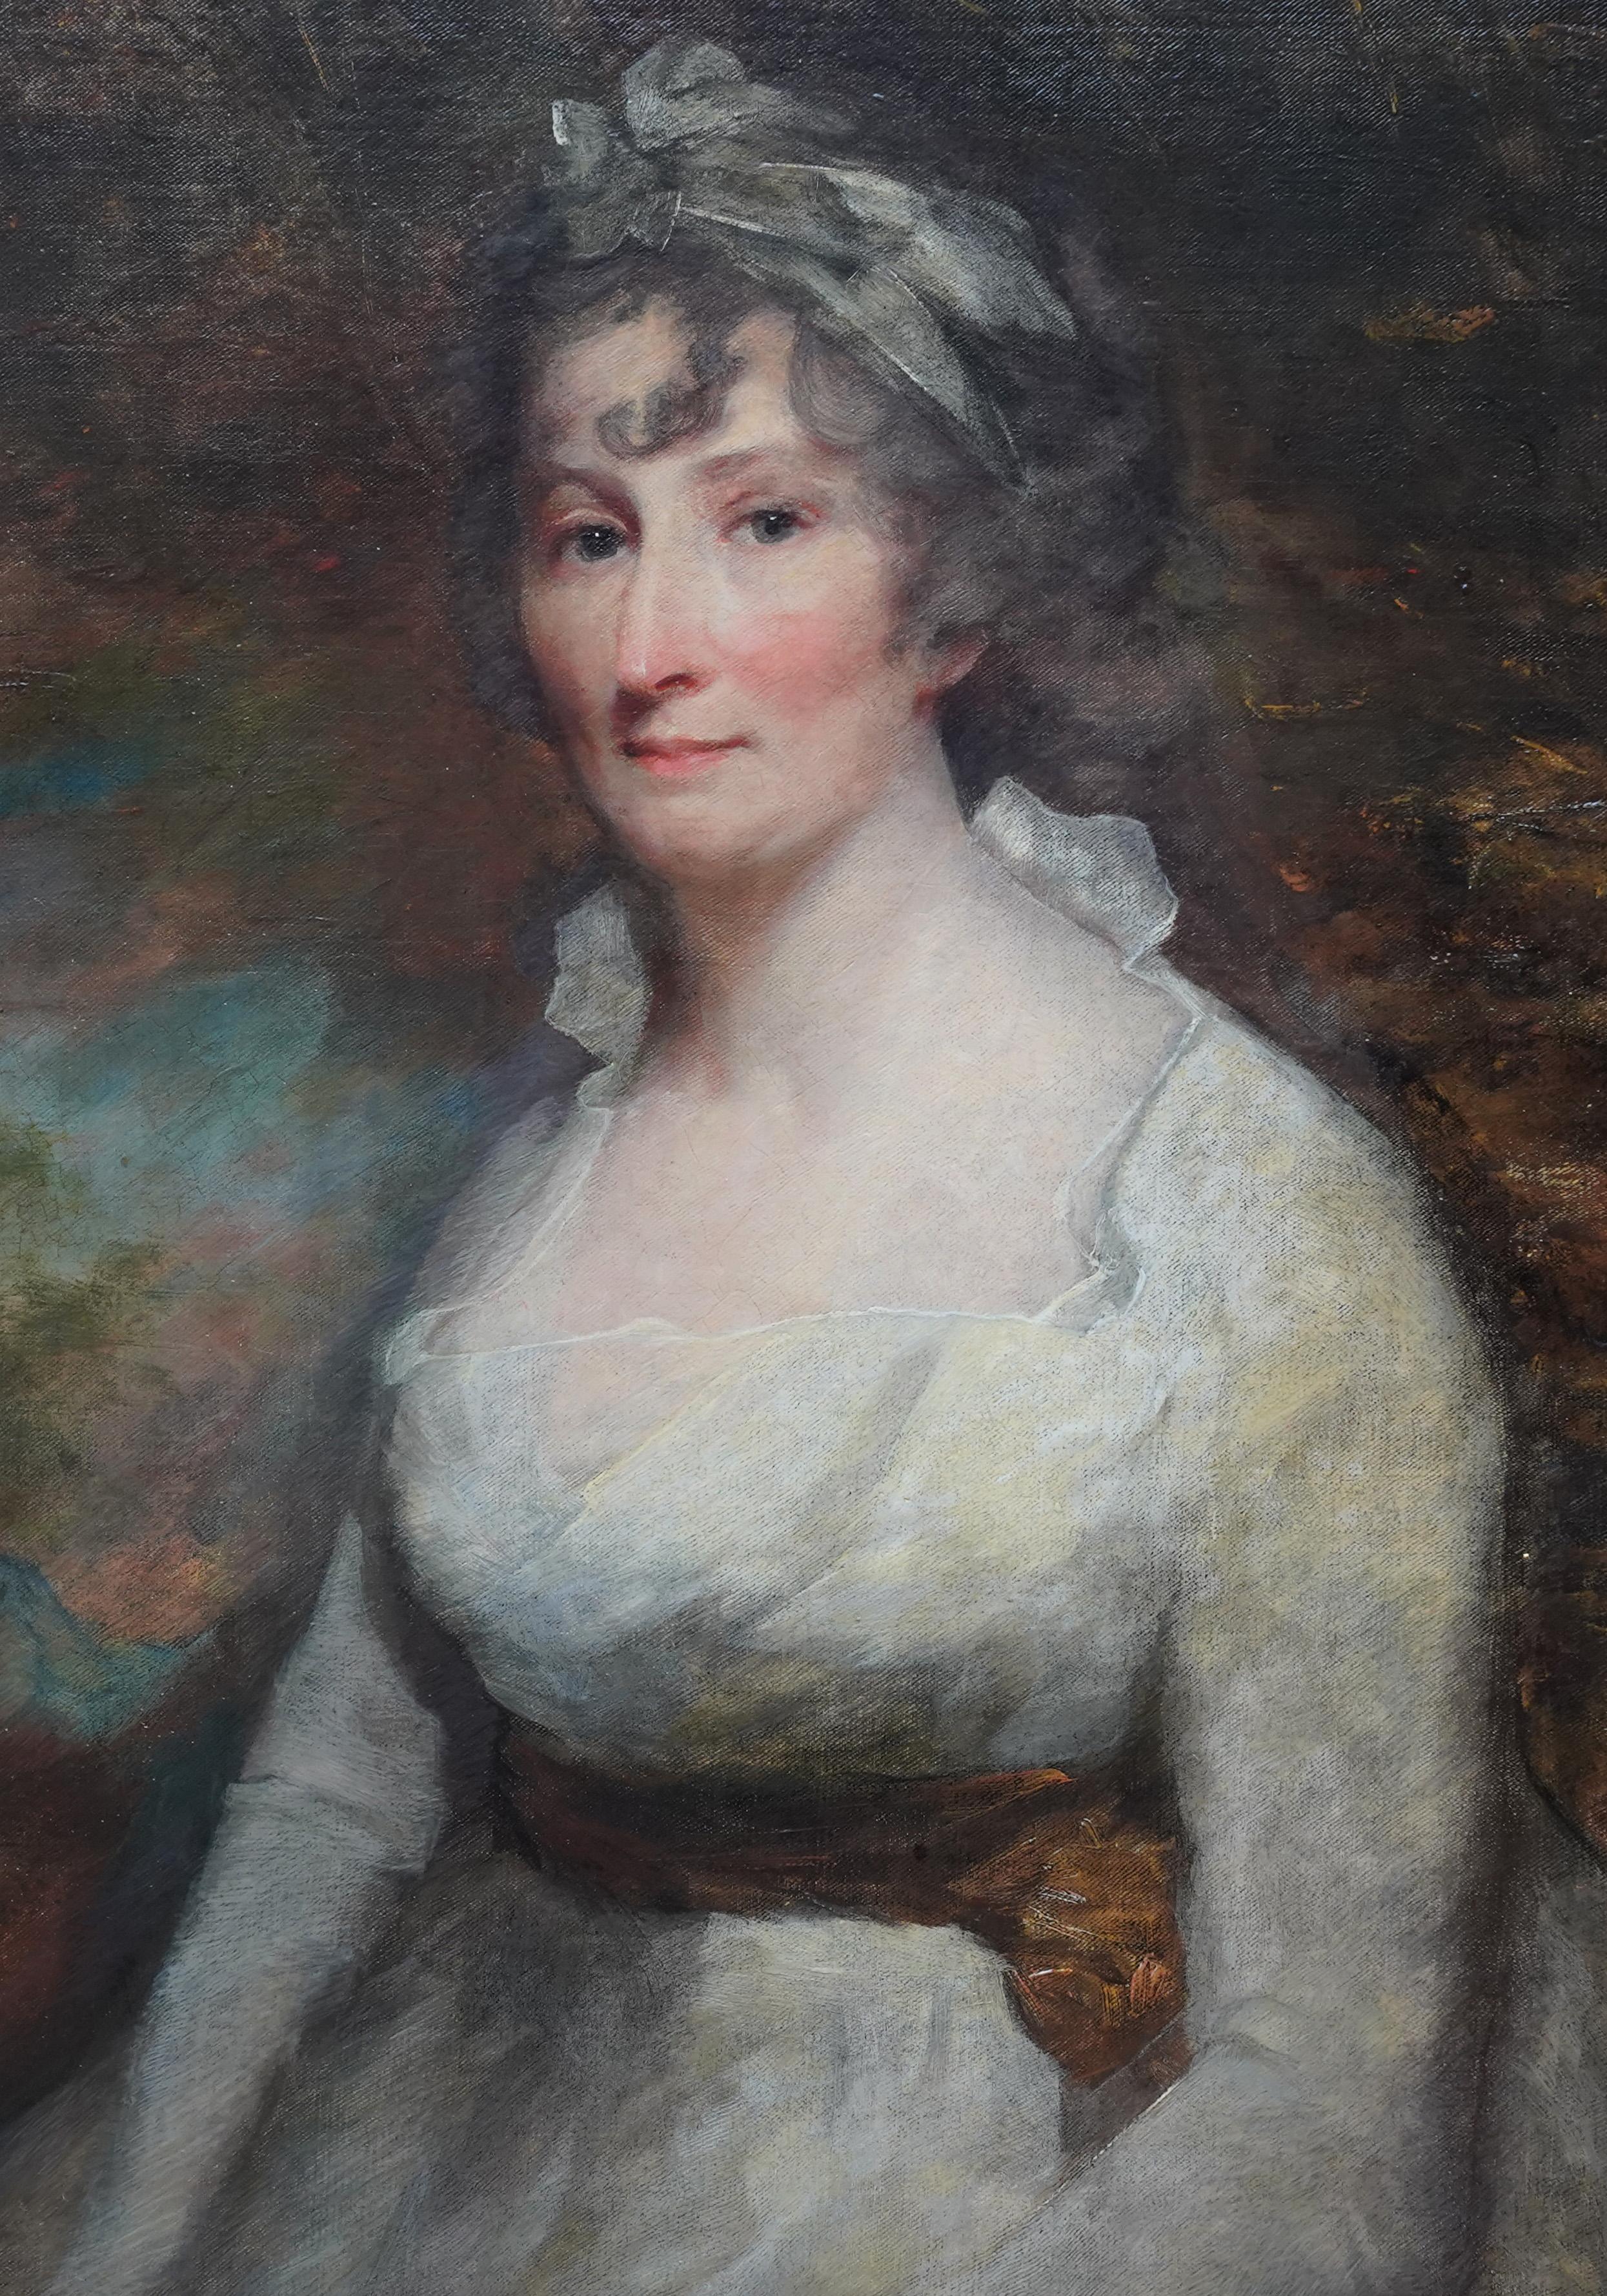 A fine large and stunning Scottish Old Master portrait oil painting on canvas portrait in good condition which depicts Lady Eleanor Dundas in a white dress set against an open landscape. Painted circa 1800 it is a fine Old Master portrait painting